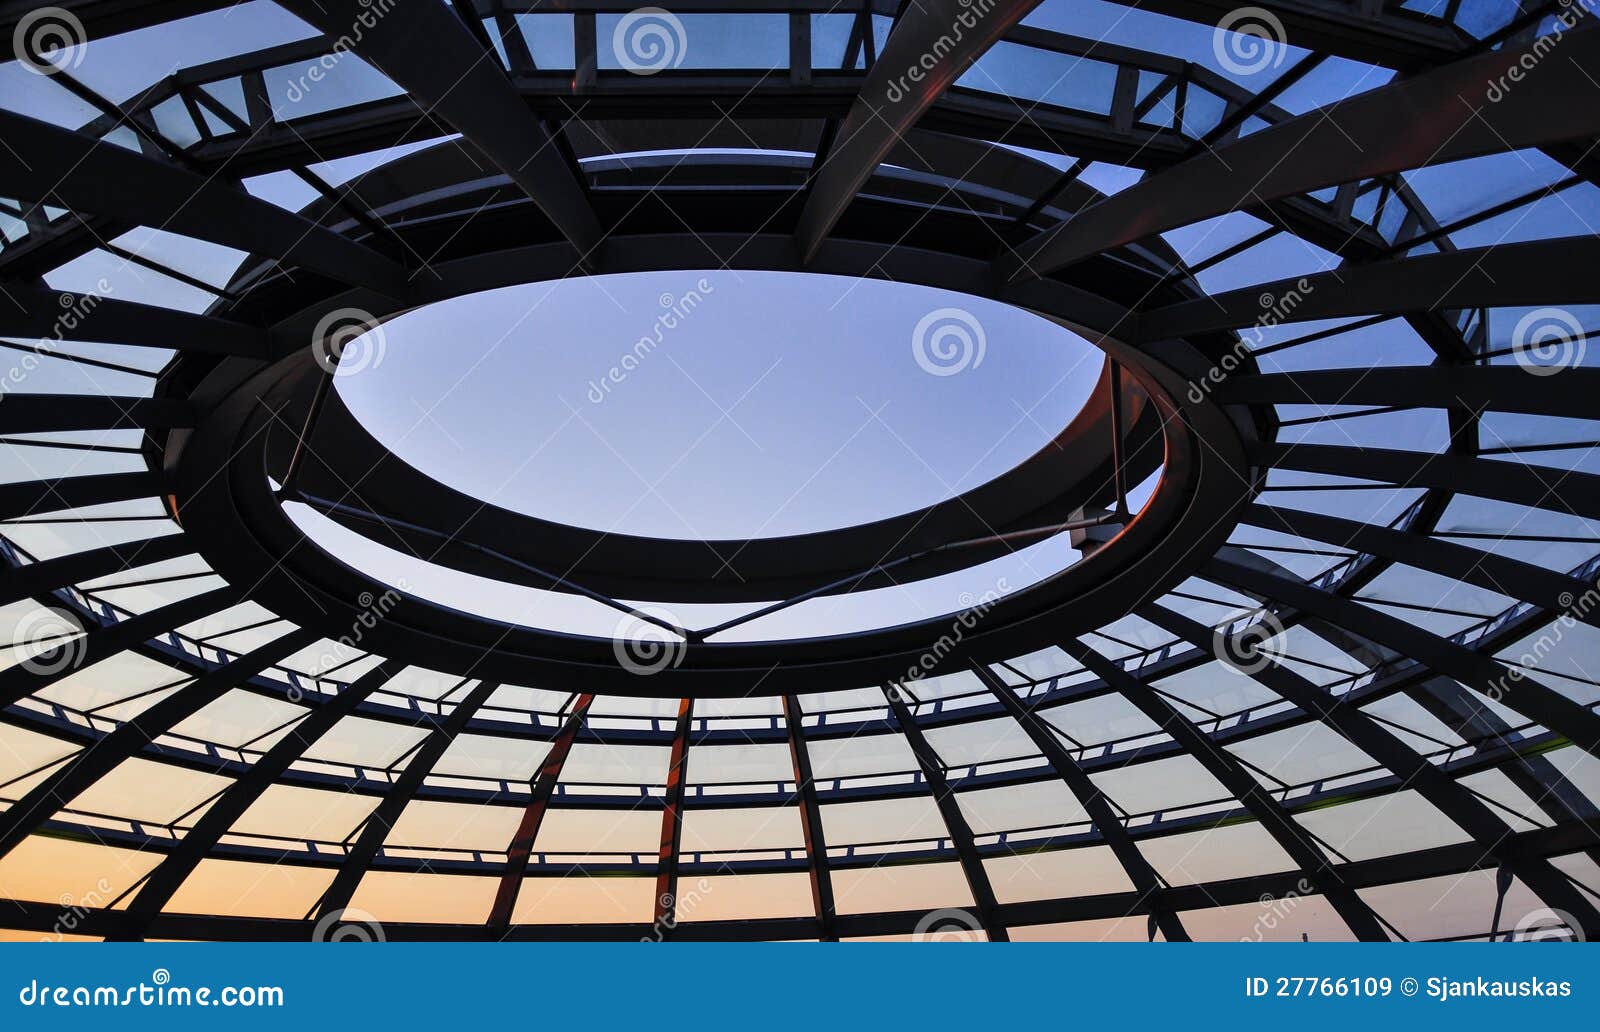 reichstag dome in berlin